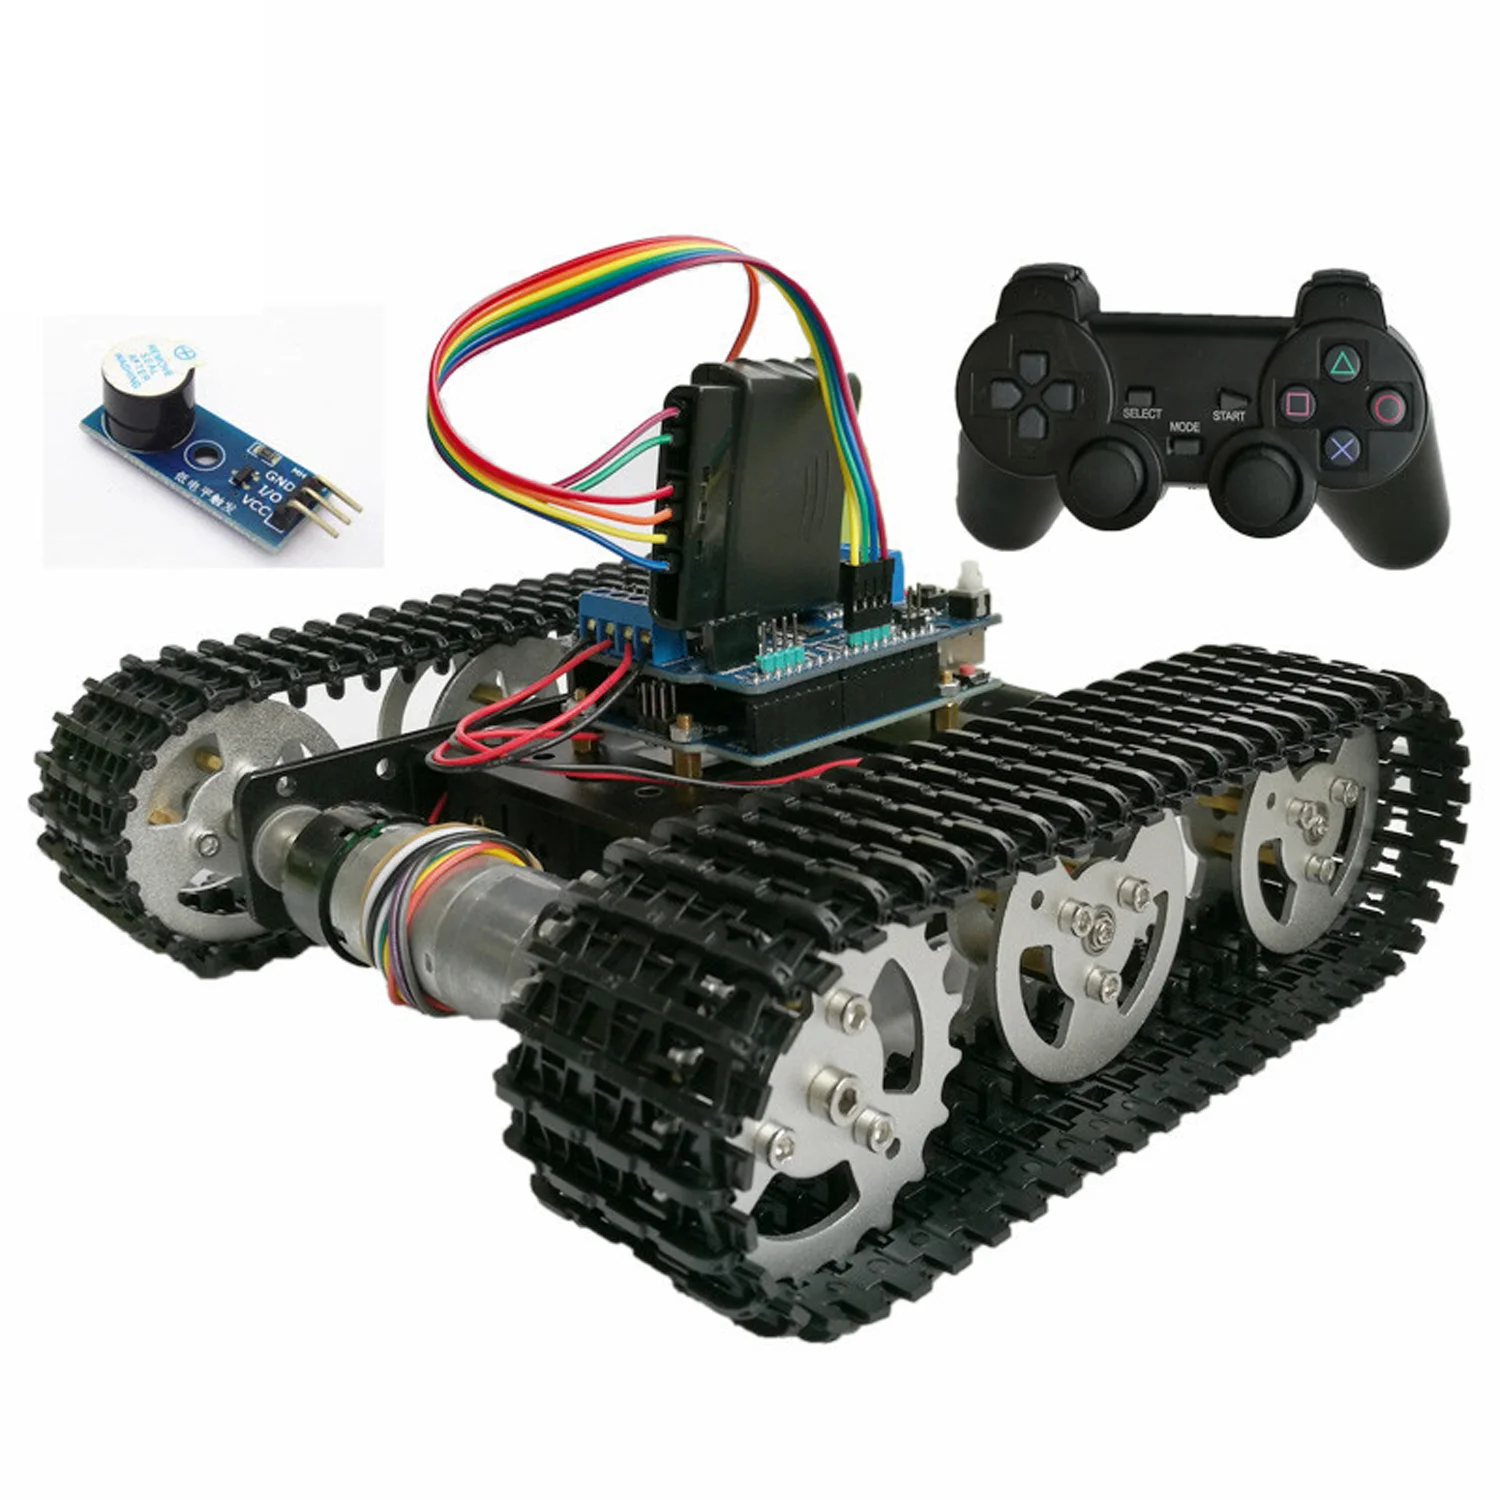 Wireless Control Smart RC Robot Kit by handle joystick Tank Car Chassis with Control Kit for  Motor Shield DIY game play station